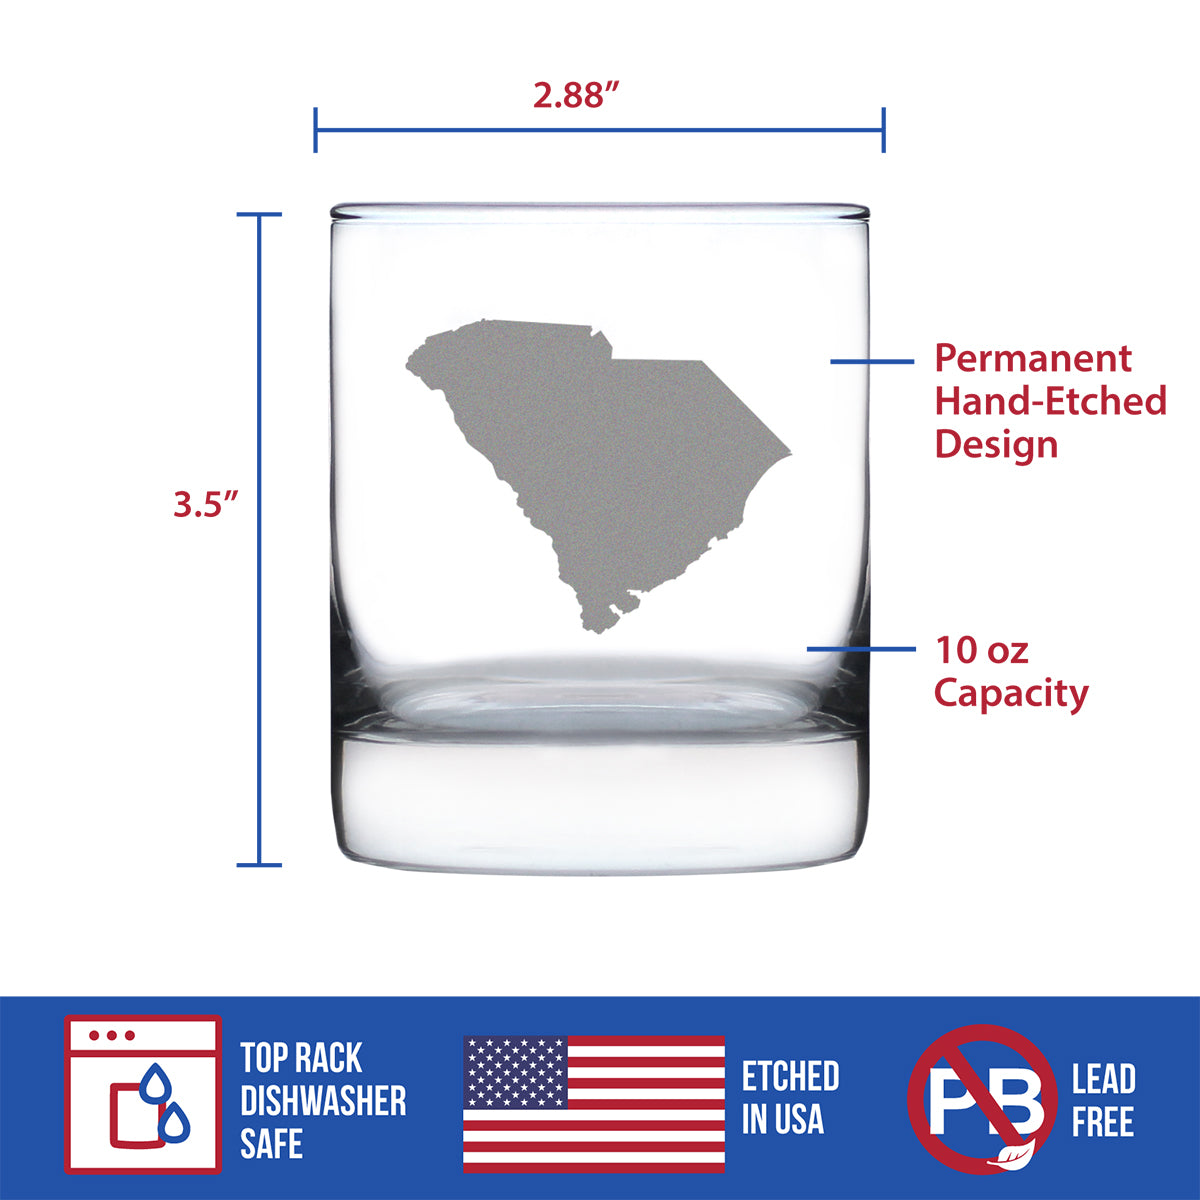 South Carolina State Outline Whiskey Rocks Glass - State Themed Drinking Decor and Gifts for South Carolinian Women &amp; Men - 10.25 Oz Whisky Tumbler Glasses